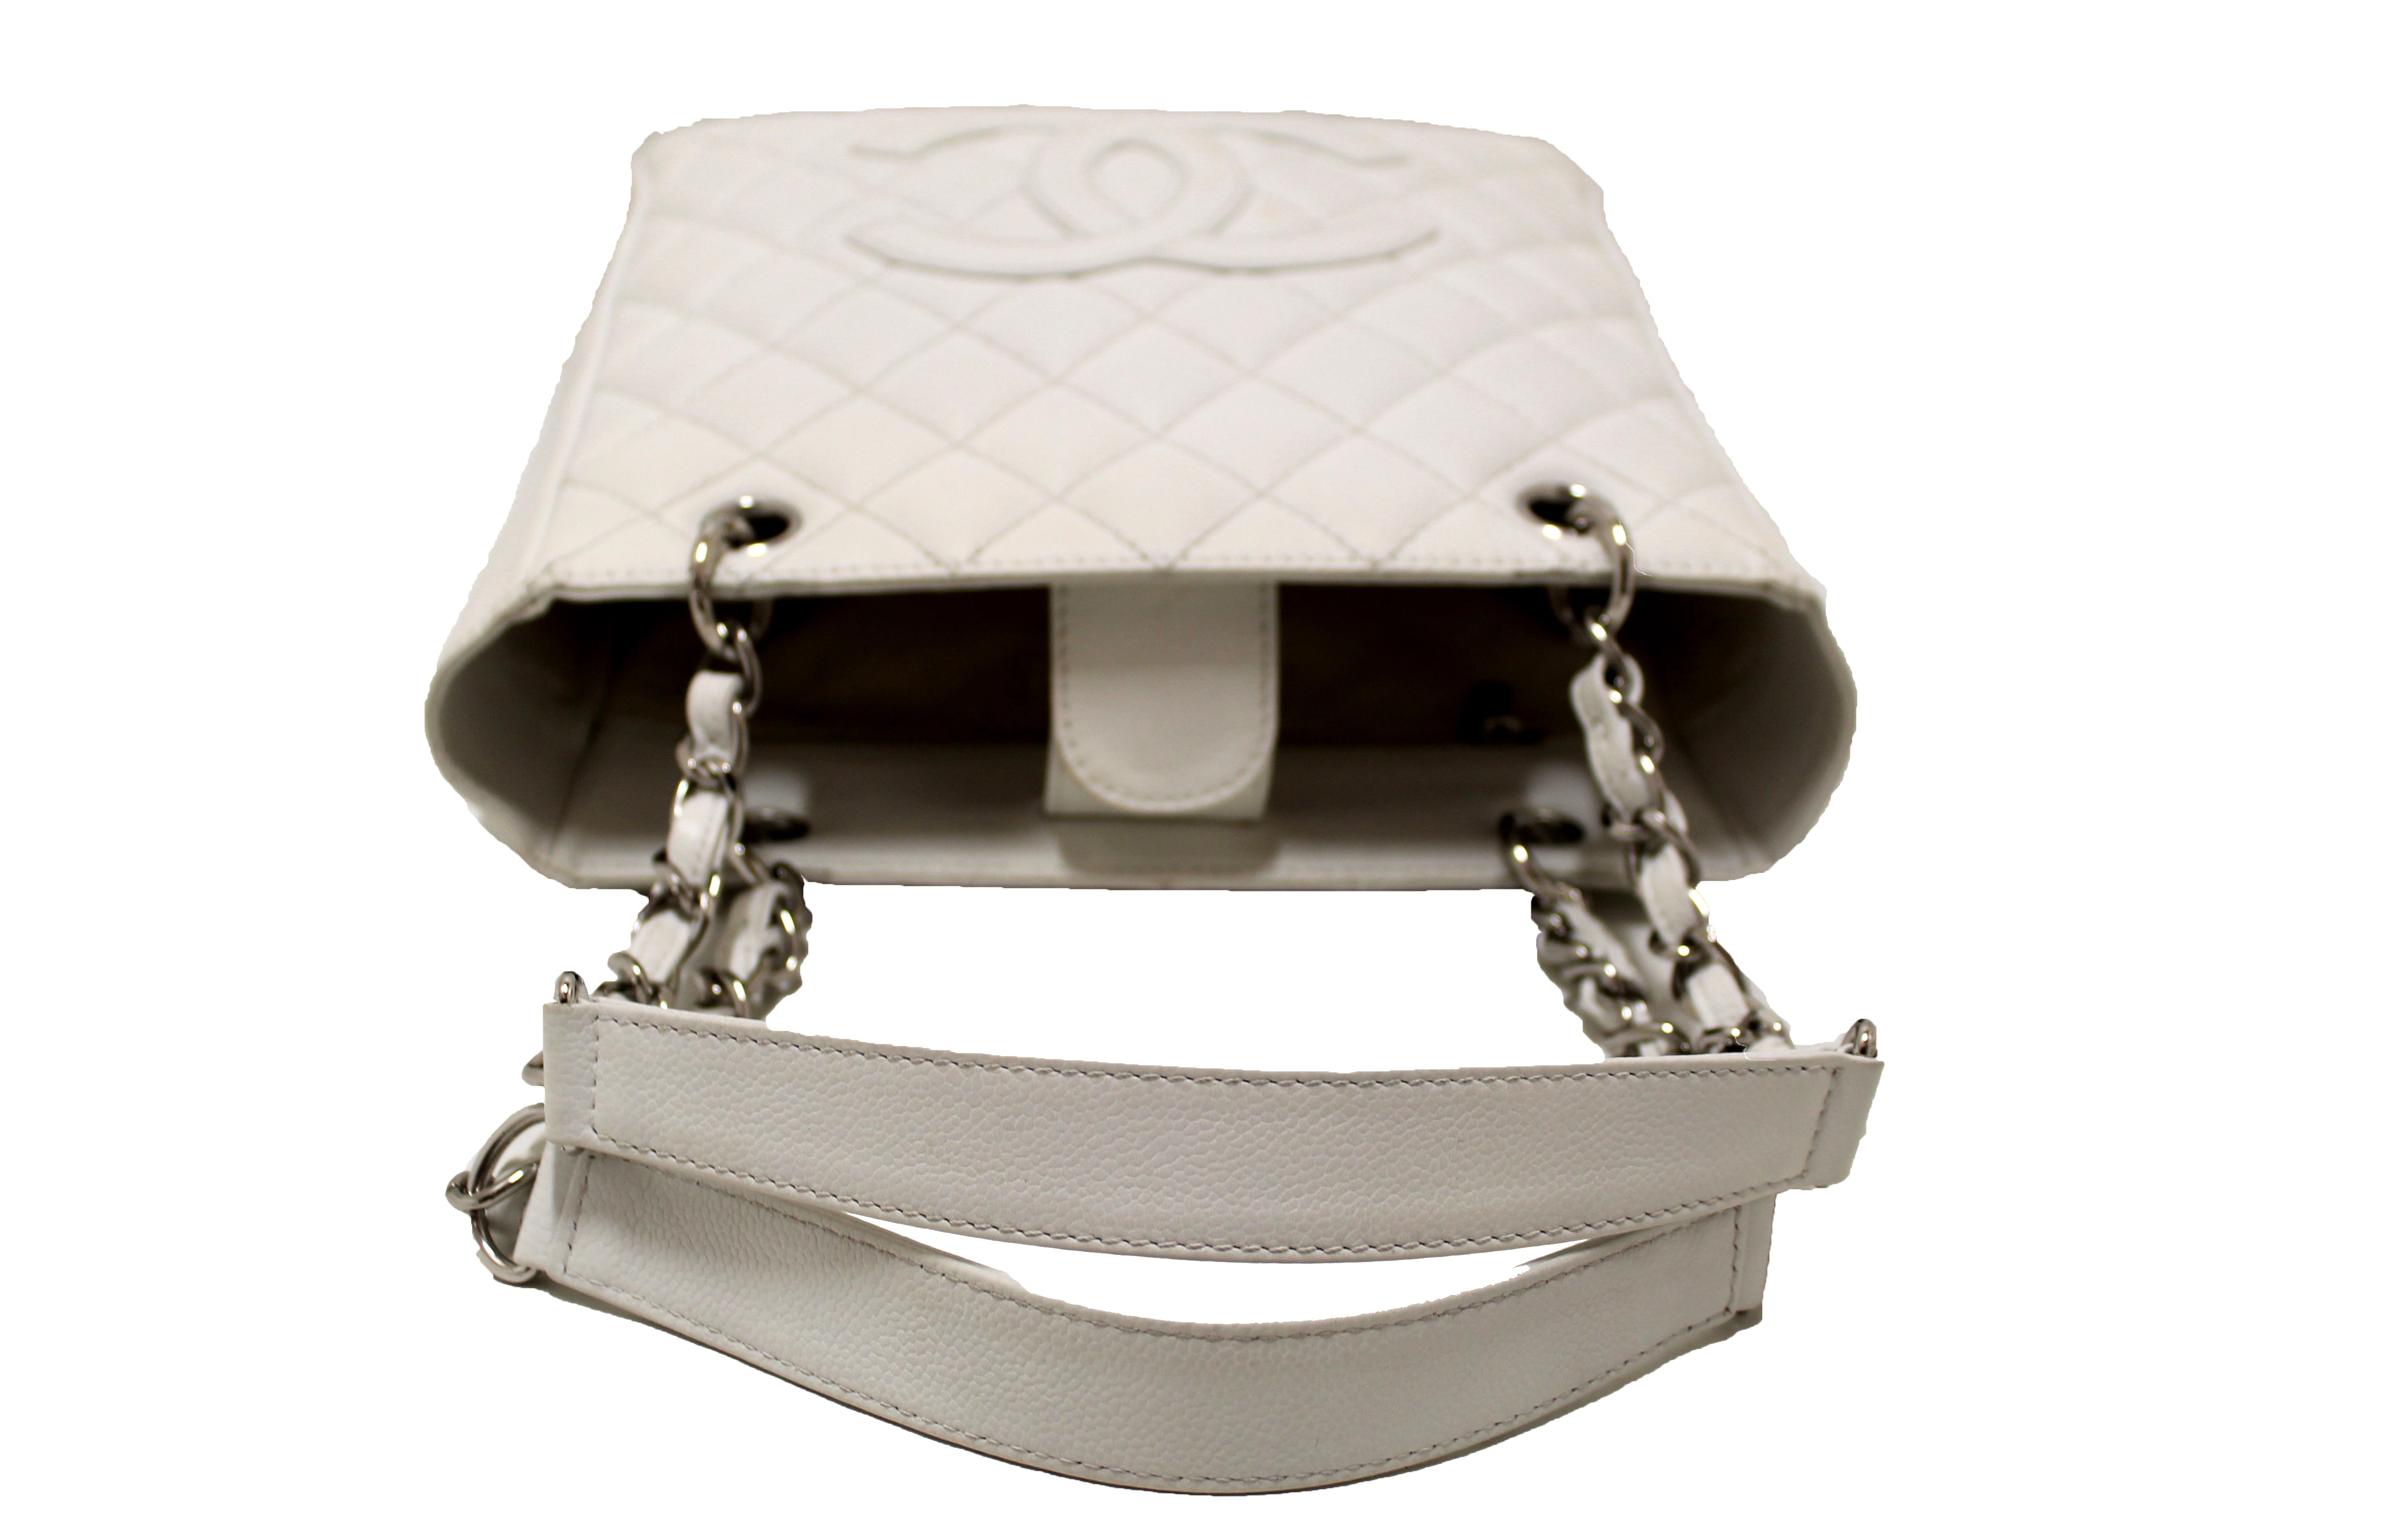 Authentic Chanel White Caviar Leather Petite Shopping Tote